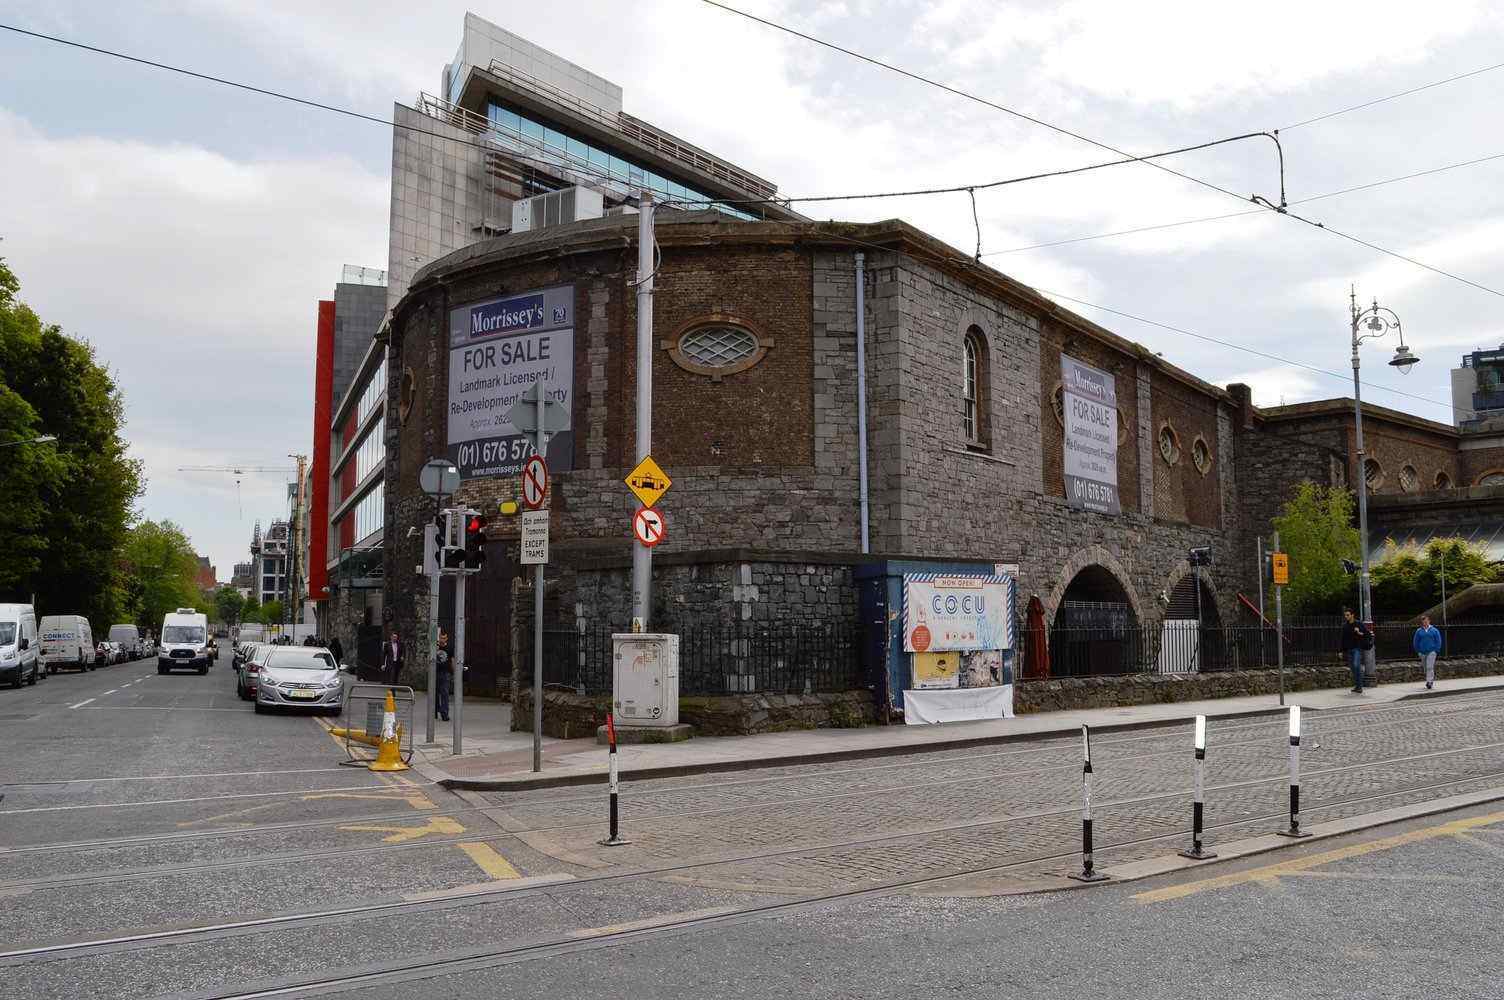 Recent pub sales include the former POD nightclub in D2 which sold for over €4.5 million.